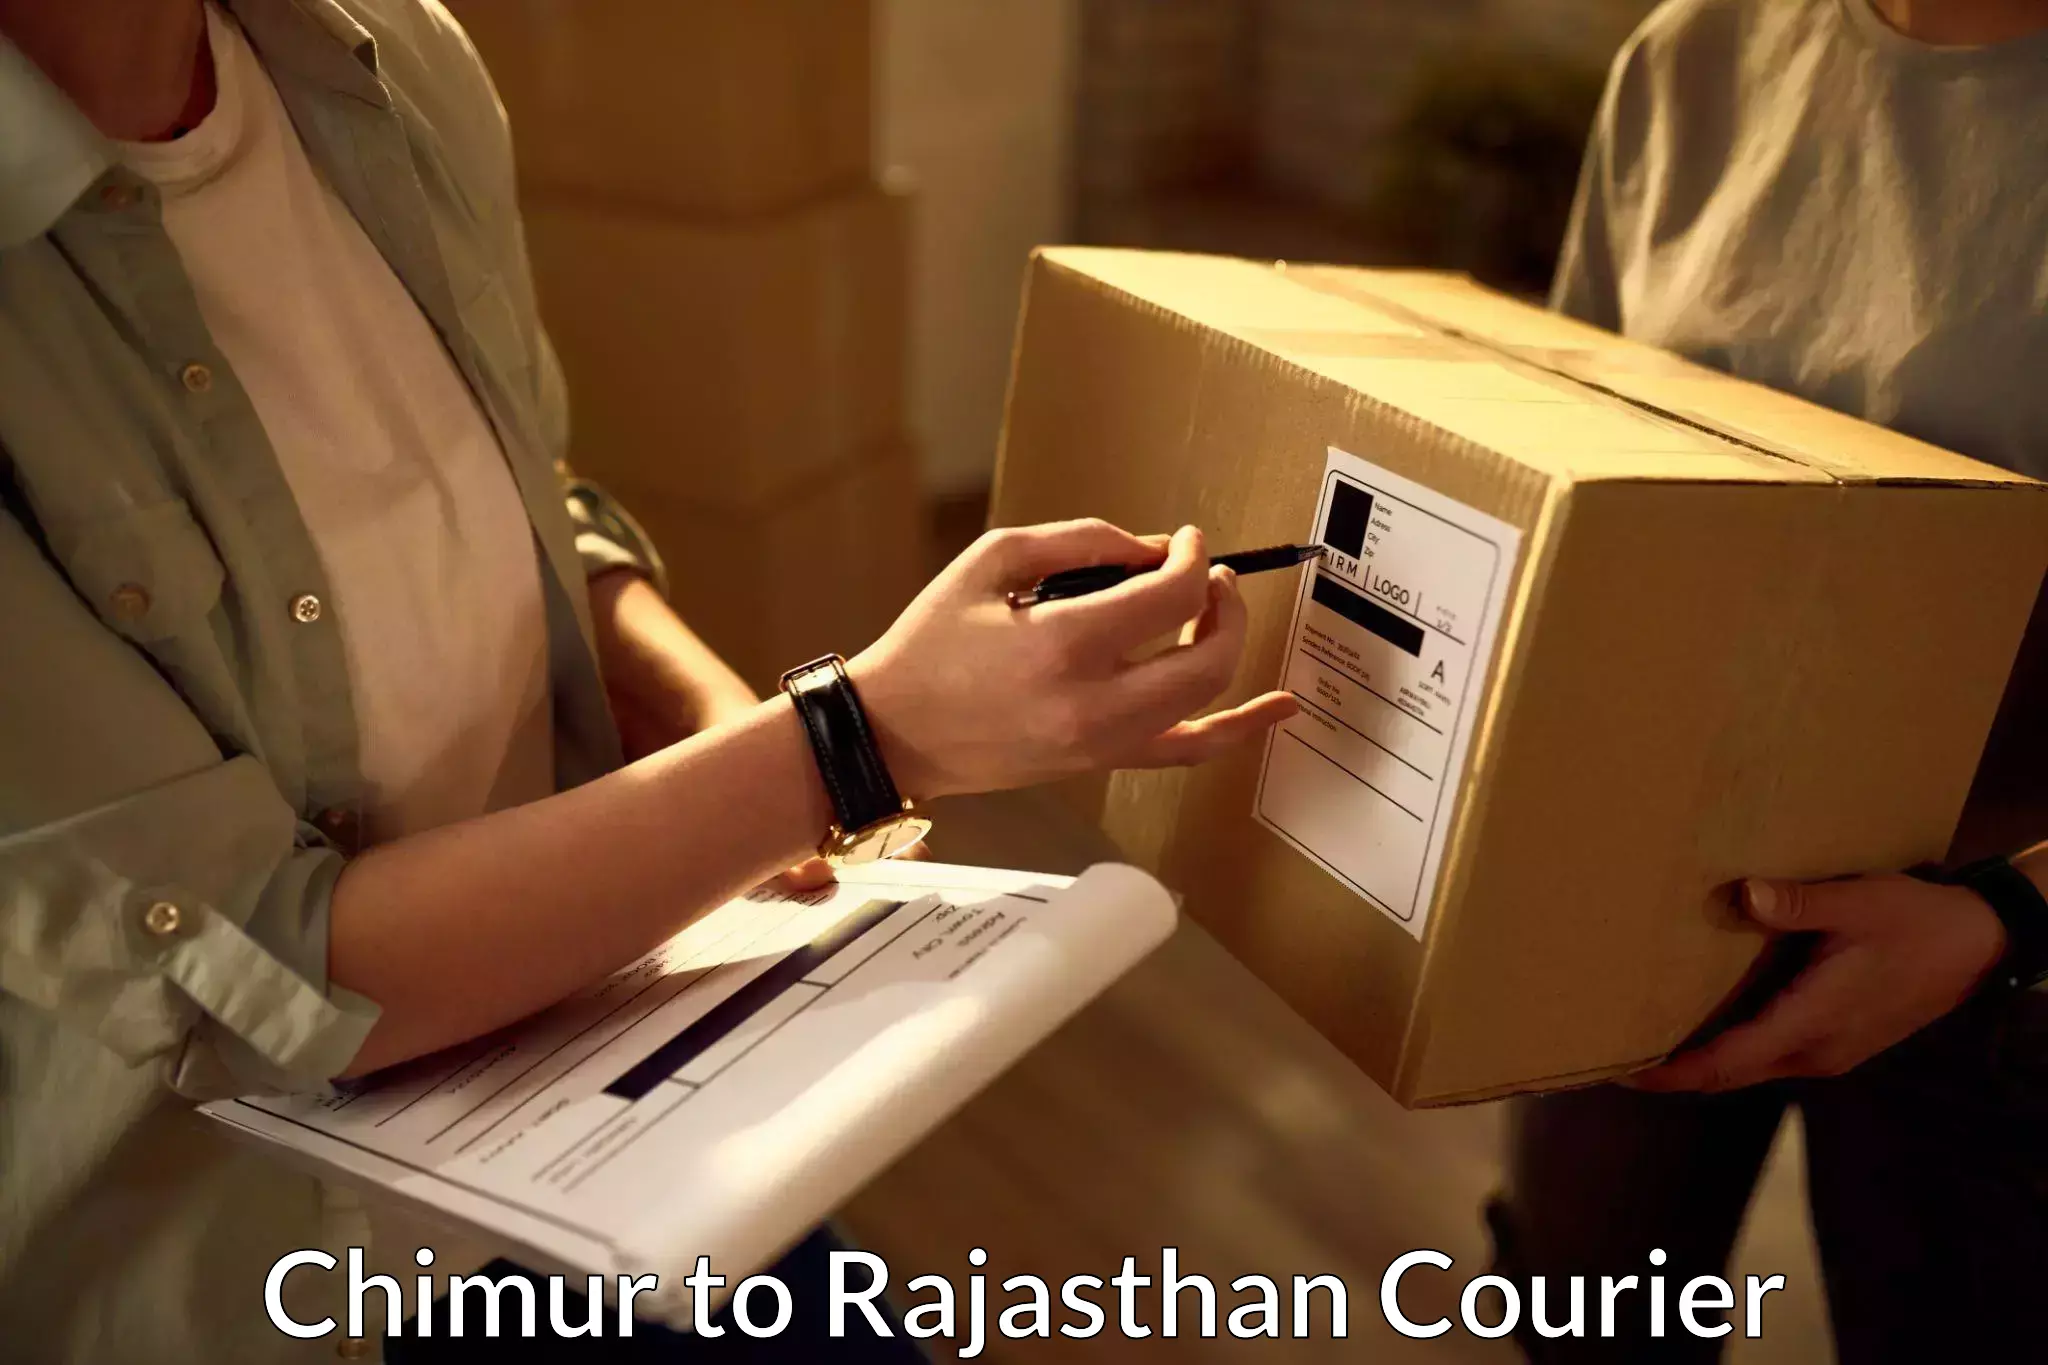 Urban courier service Chimur to Rajasthan